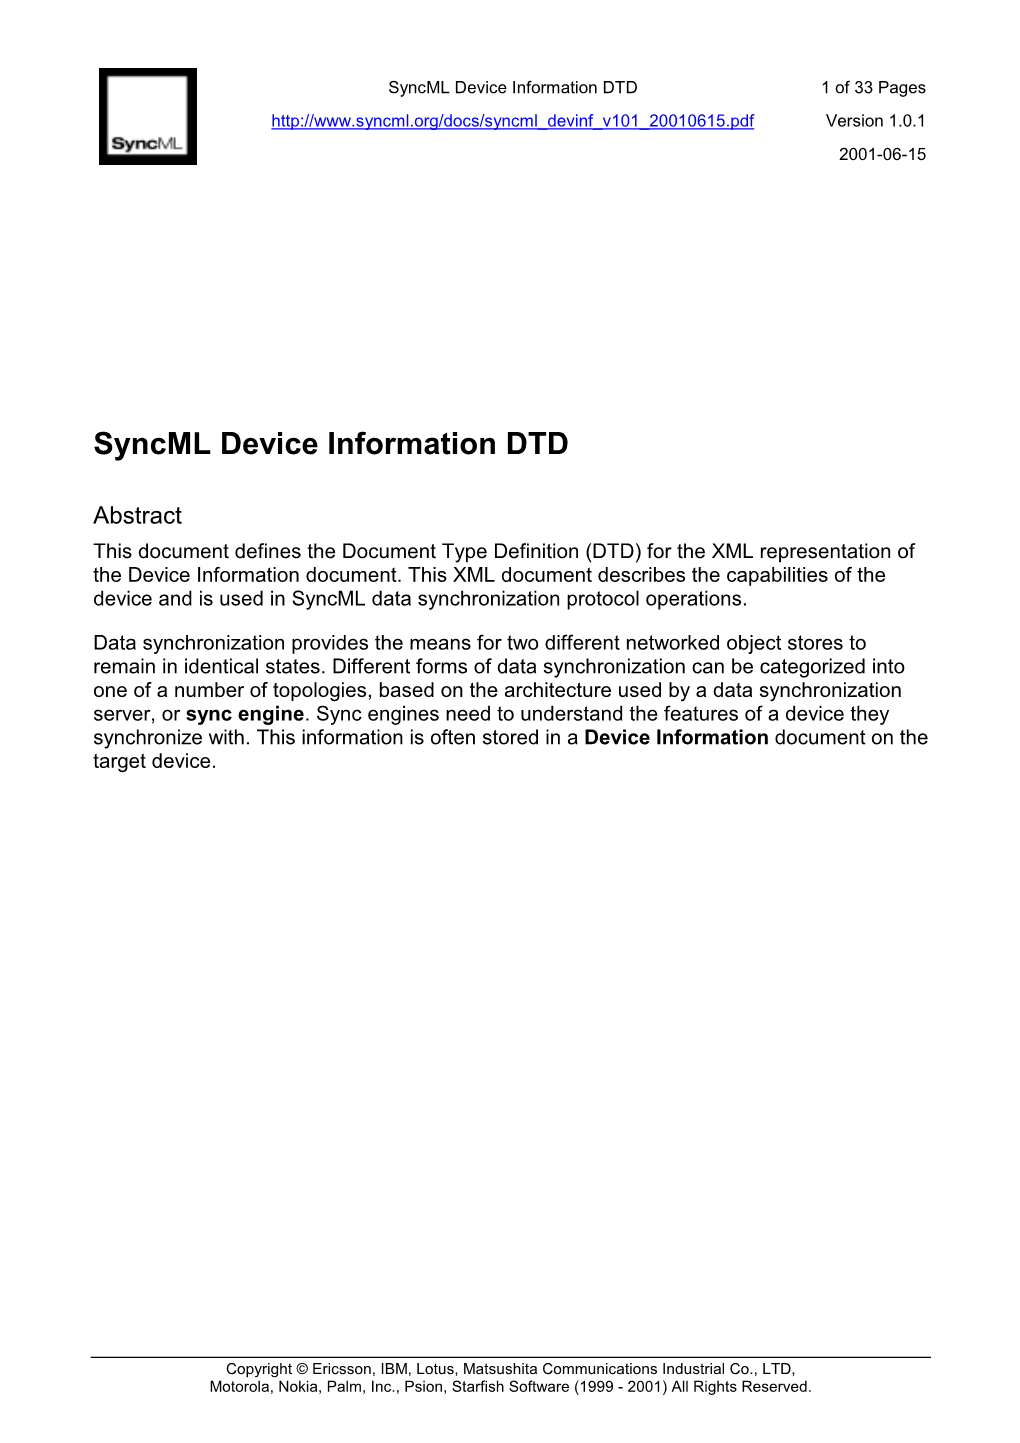 Syncml Device Information DTD 1 of 33 Pages Version 1.0.1